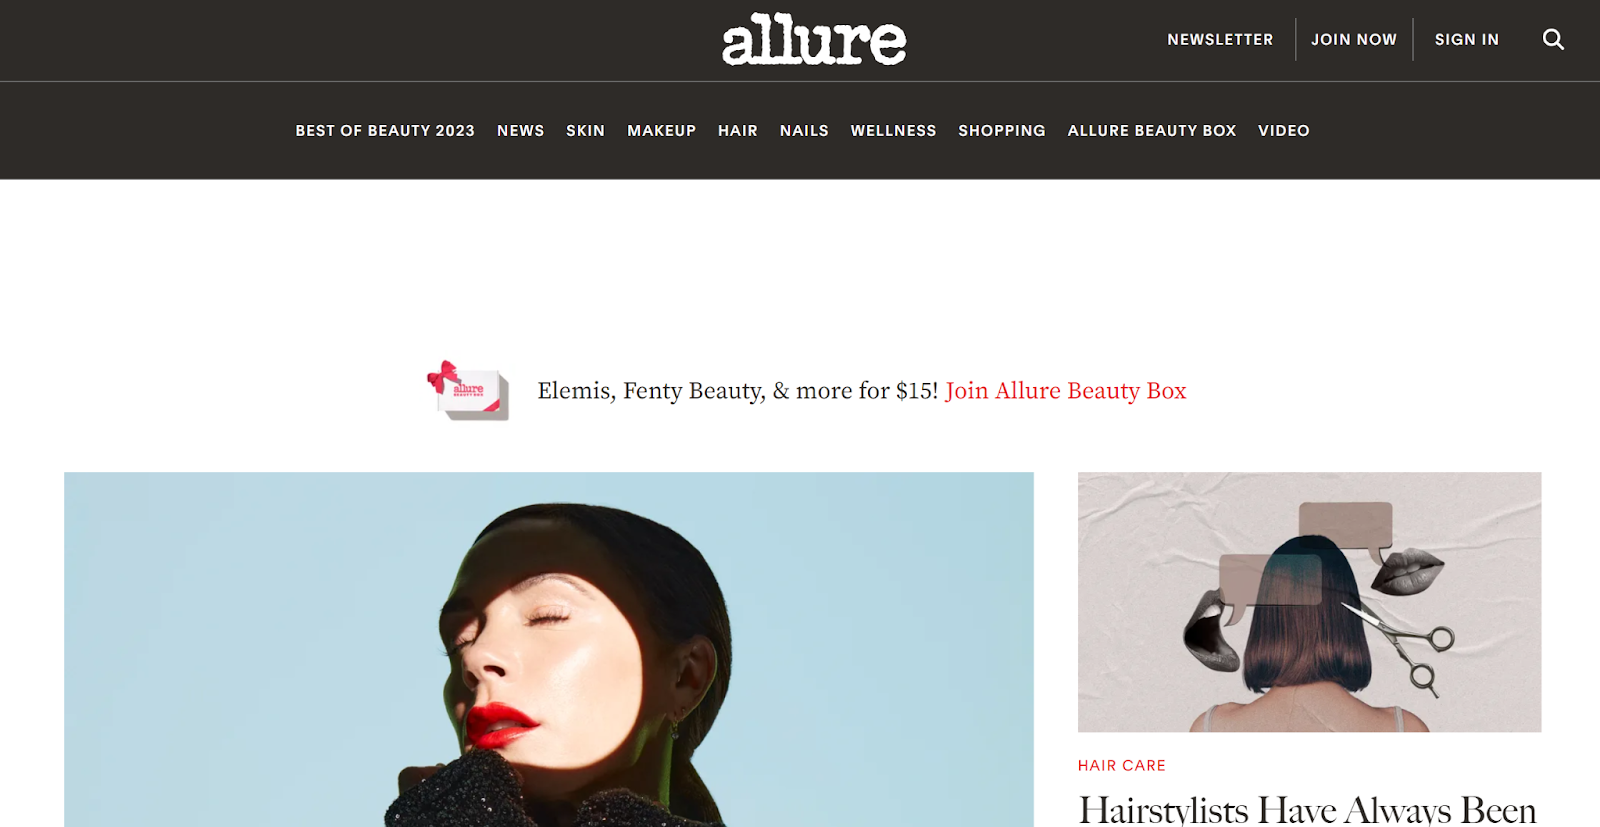 Allure is a popular beauty and fashion blog having million of readers.